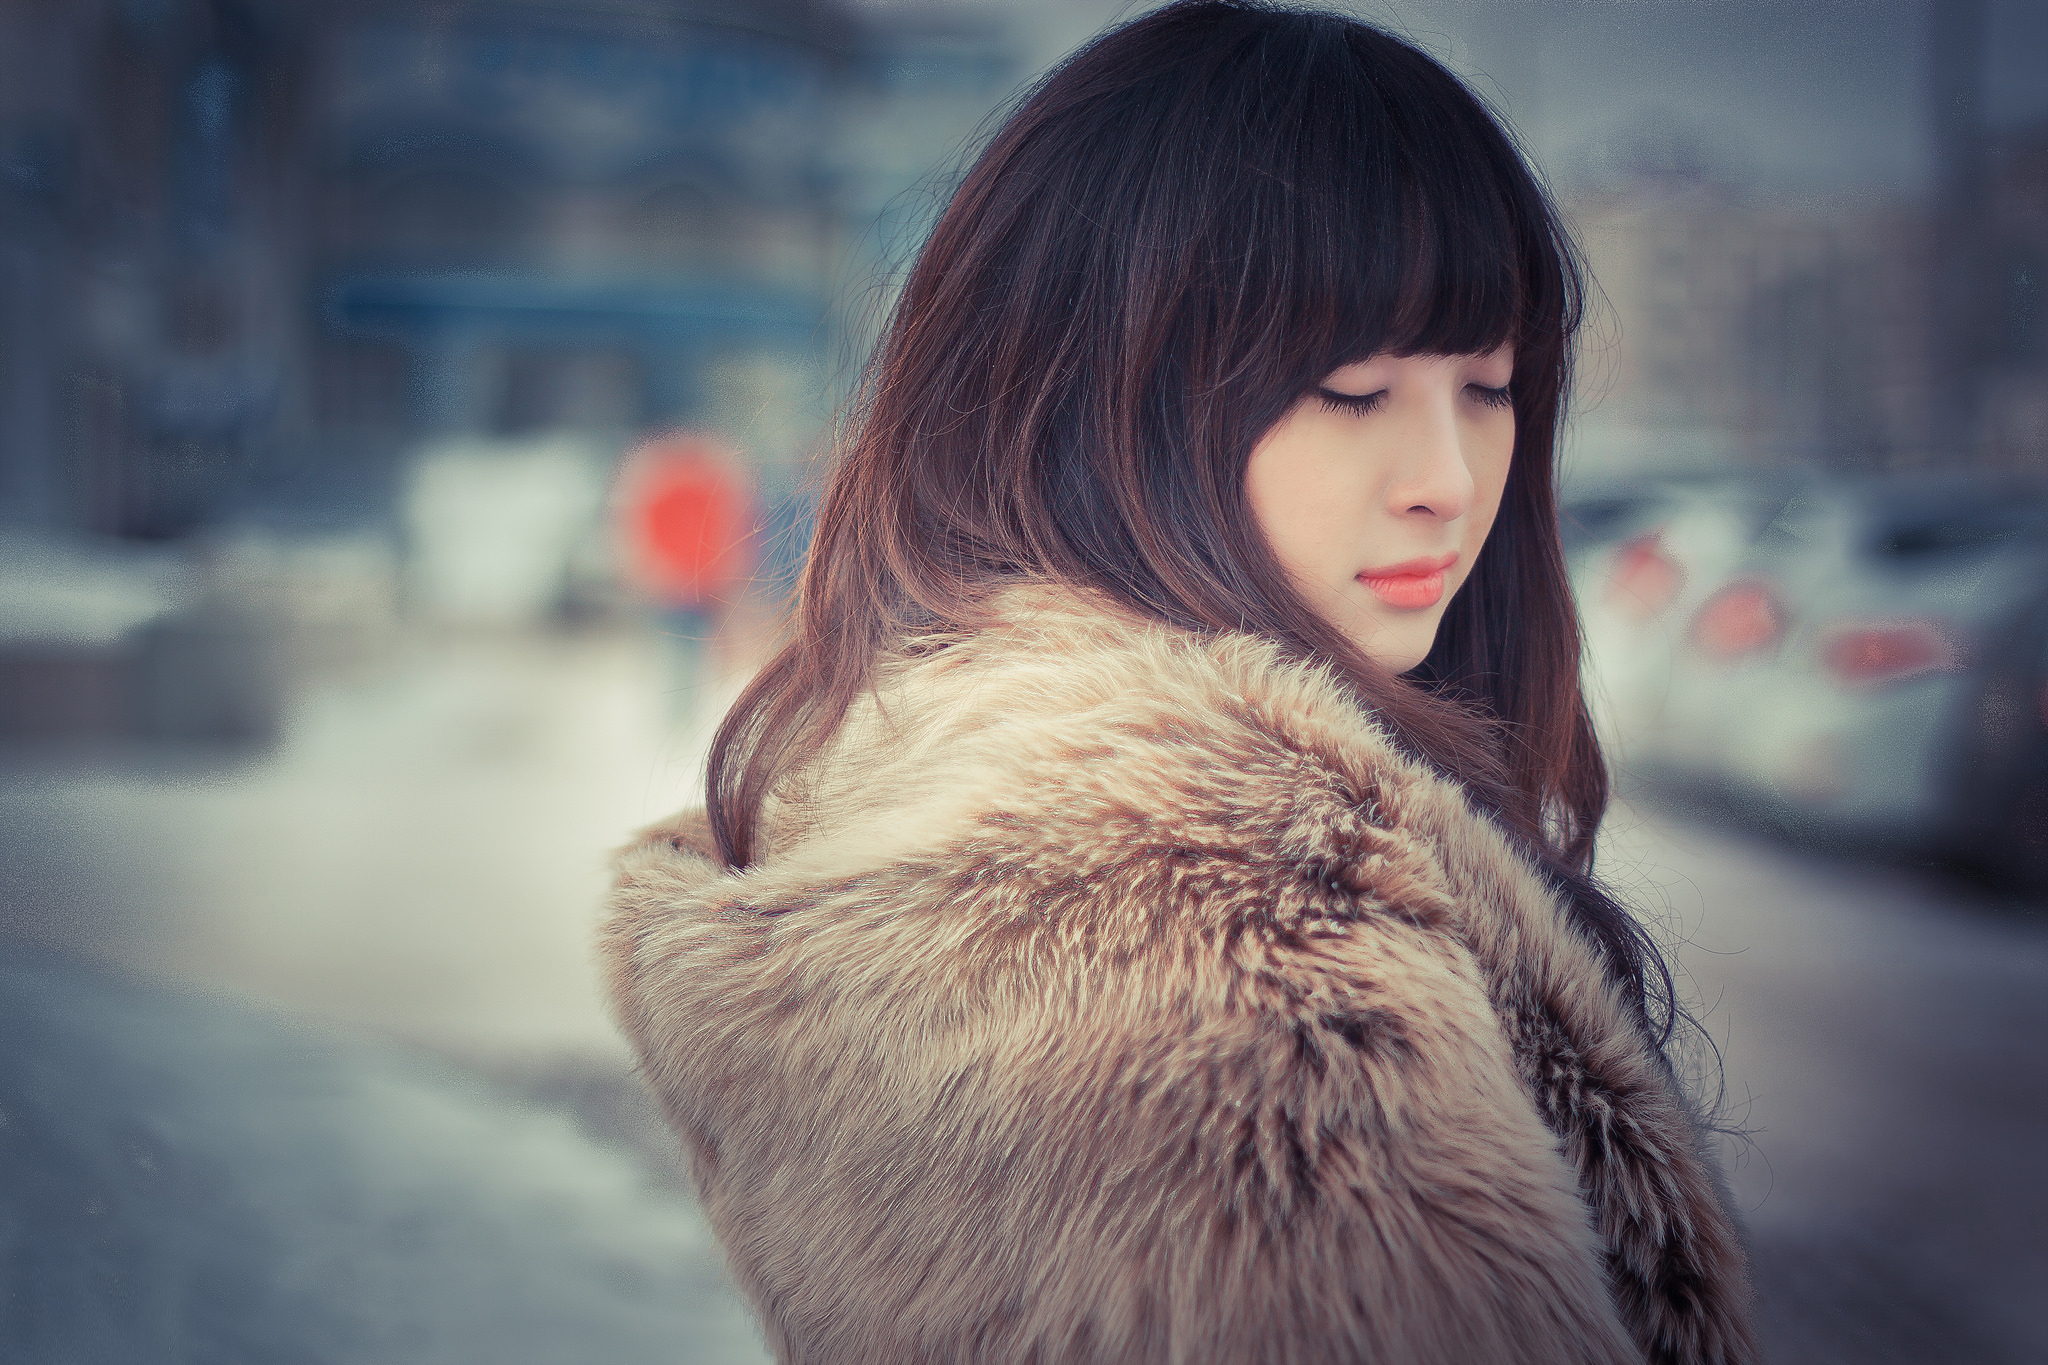 nice girl wallpaper,hair,face,fur,hairstyle,beauty